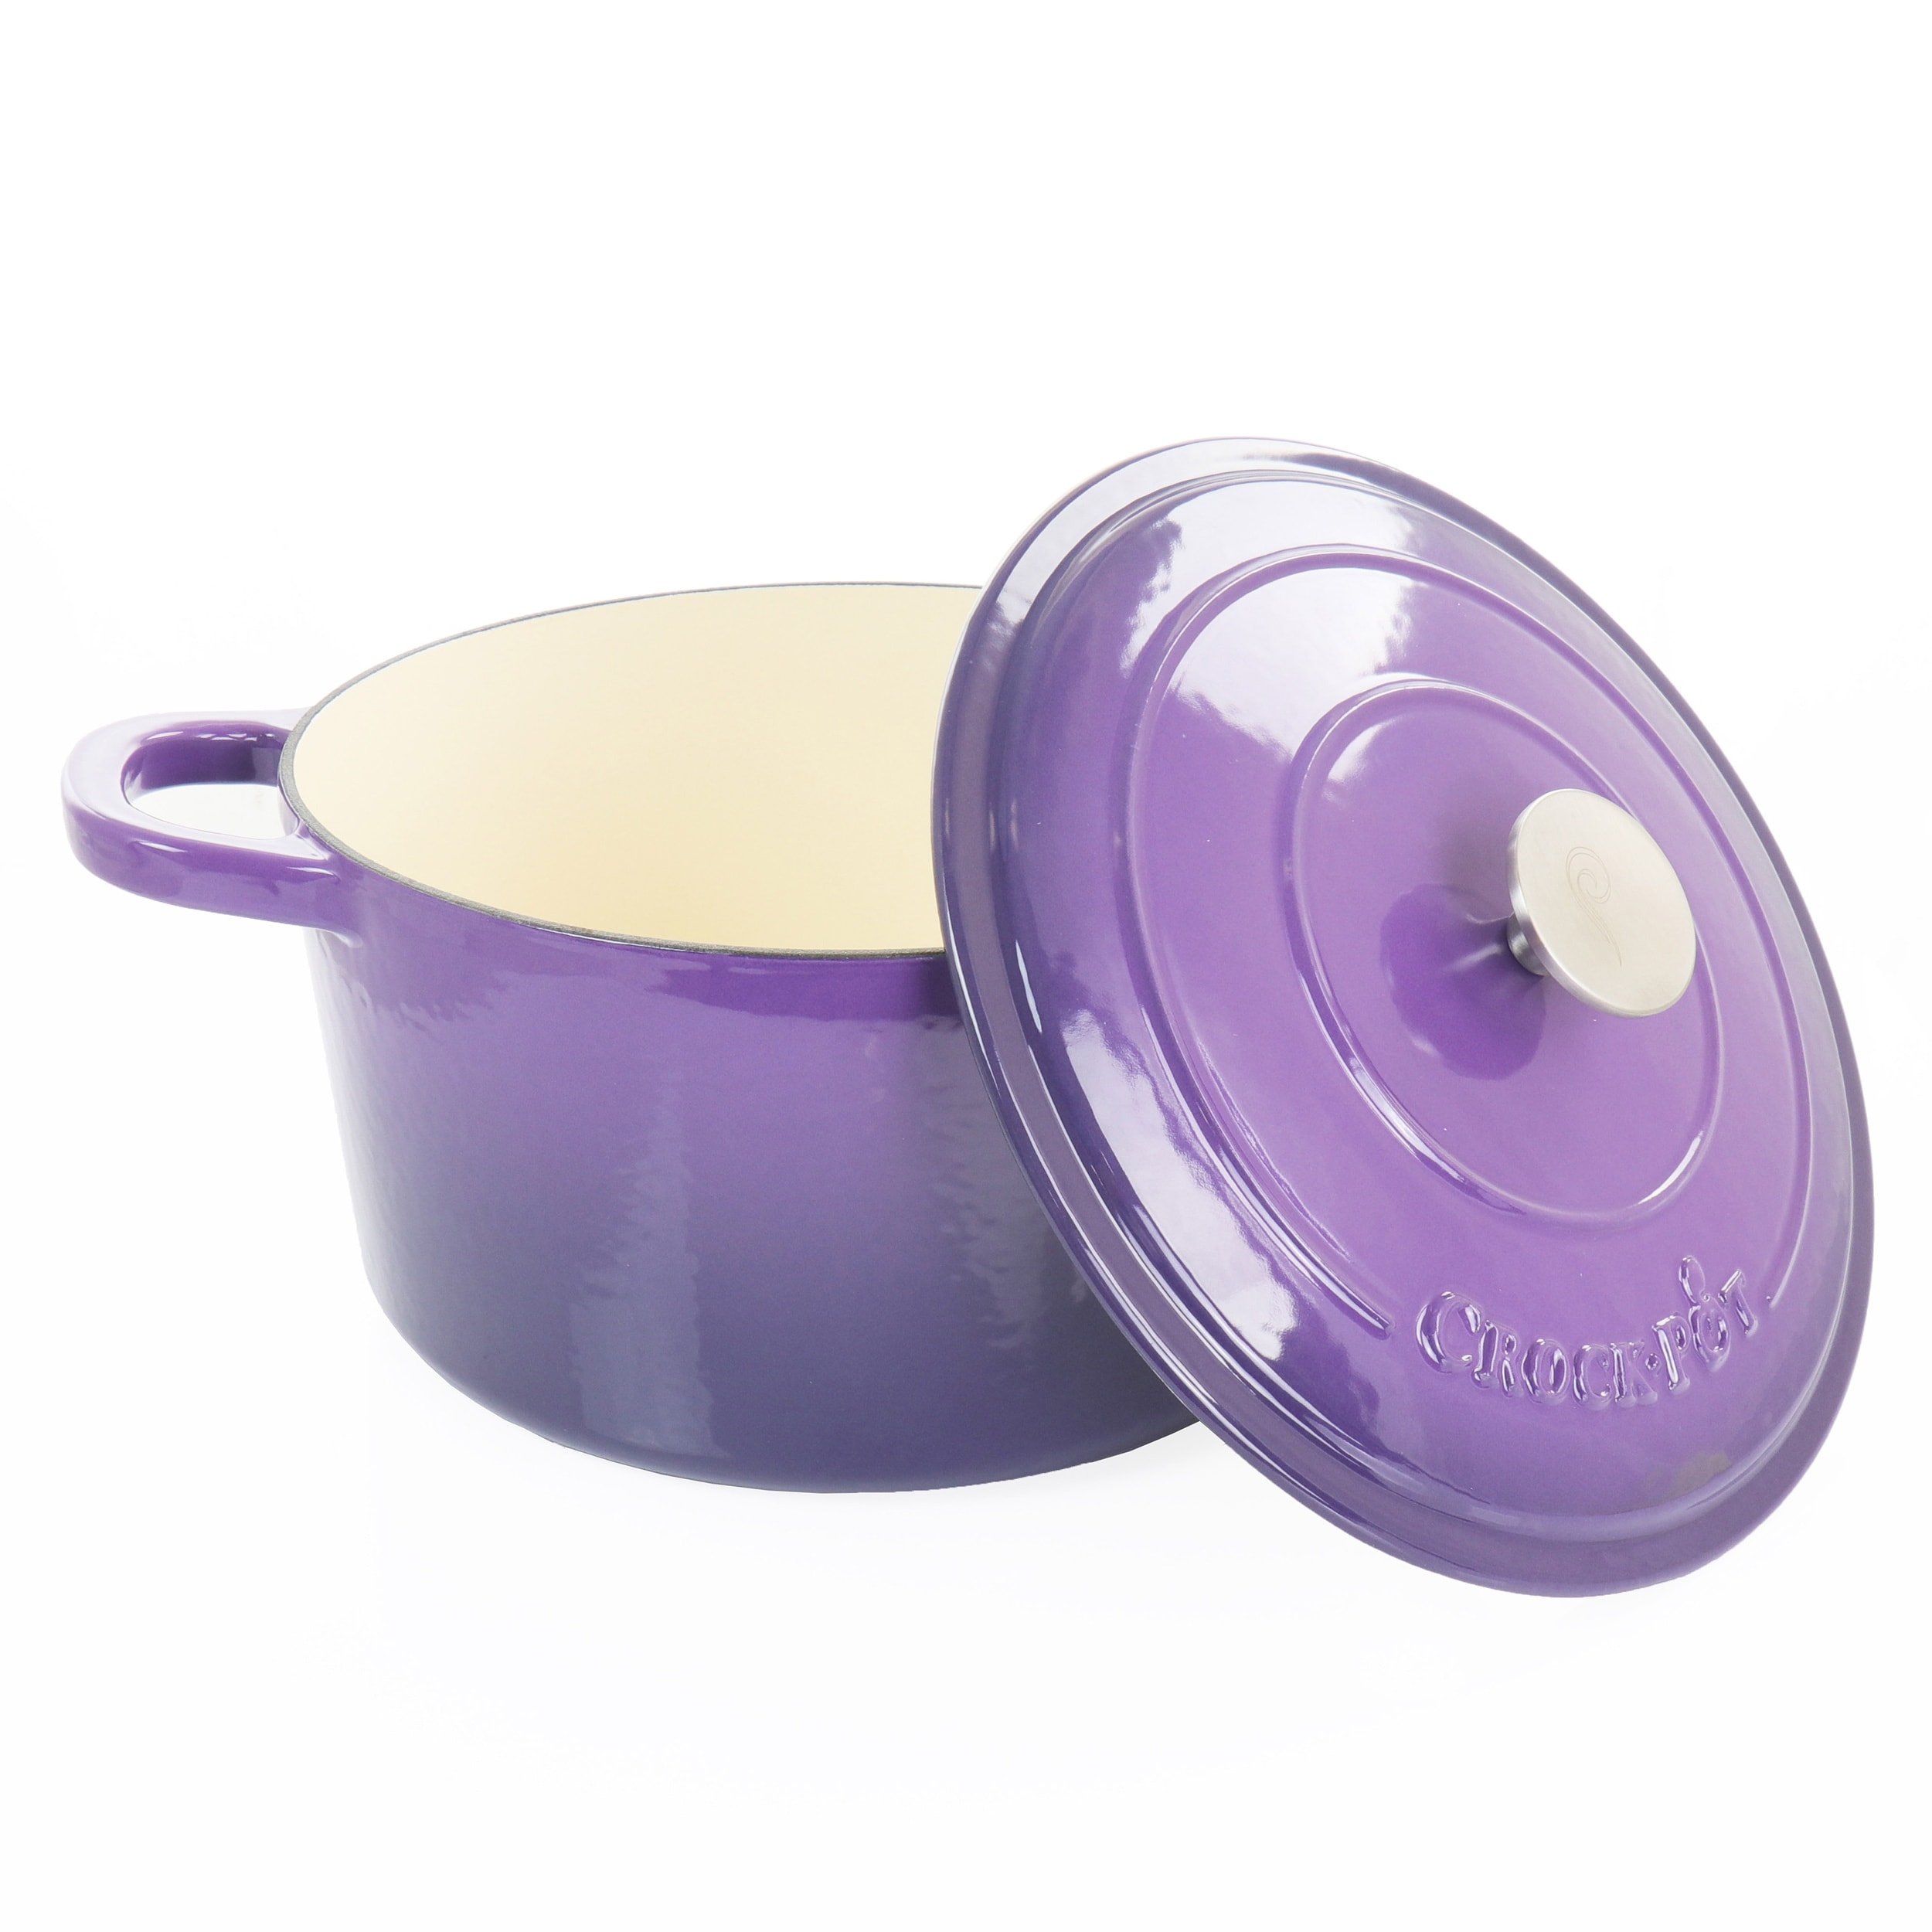 7-Qt Enameled Cast Iron Dutch Oven with Grill Lid